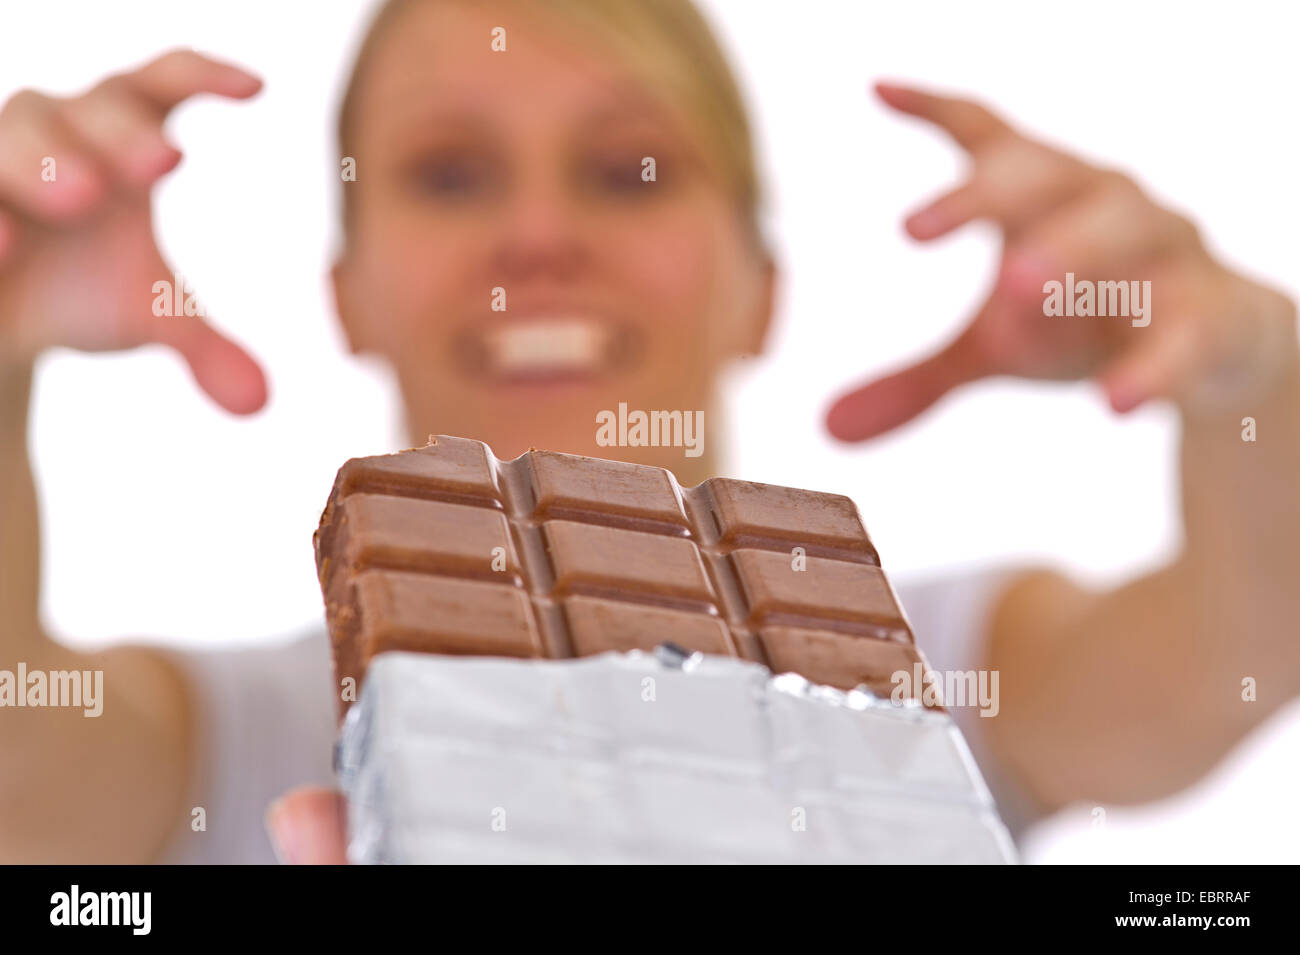 young woman greedily reaching out for a chocolate bar Stock Photo